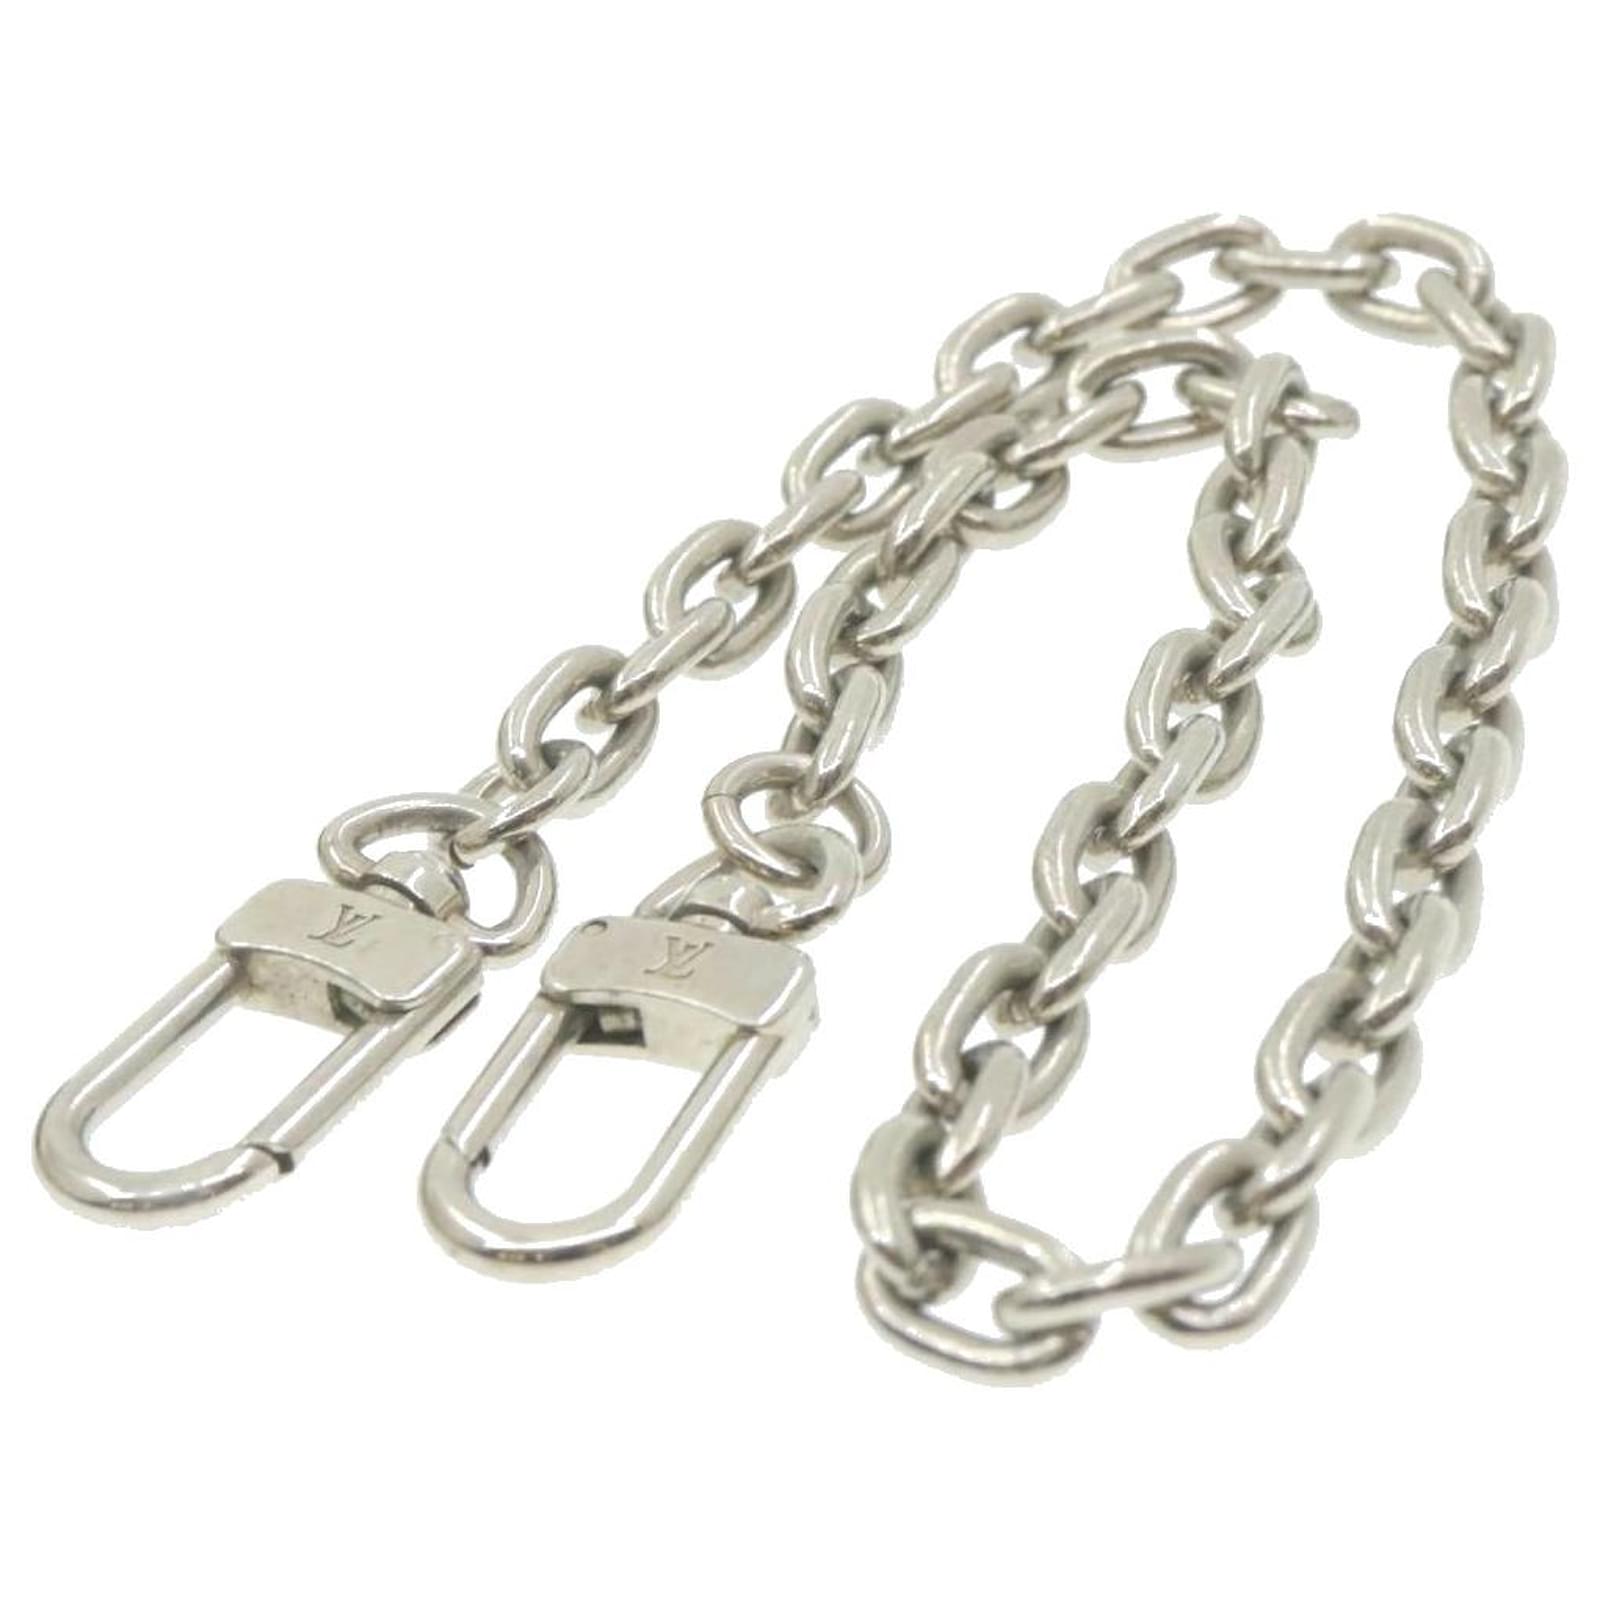 SILVER THICK PURSE CHAIN STRAP FOR LV TOILETRY 26 MAKE-UP, 52% OFF